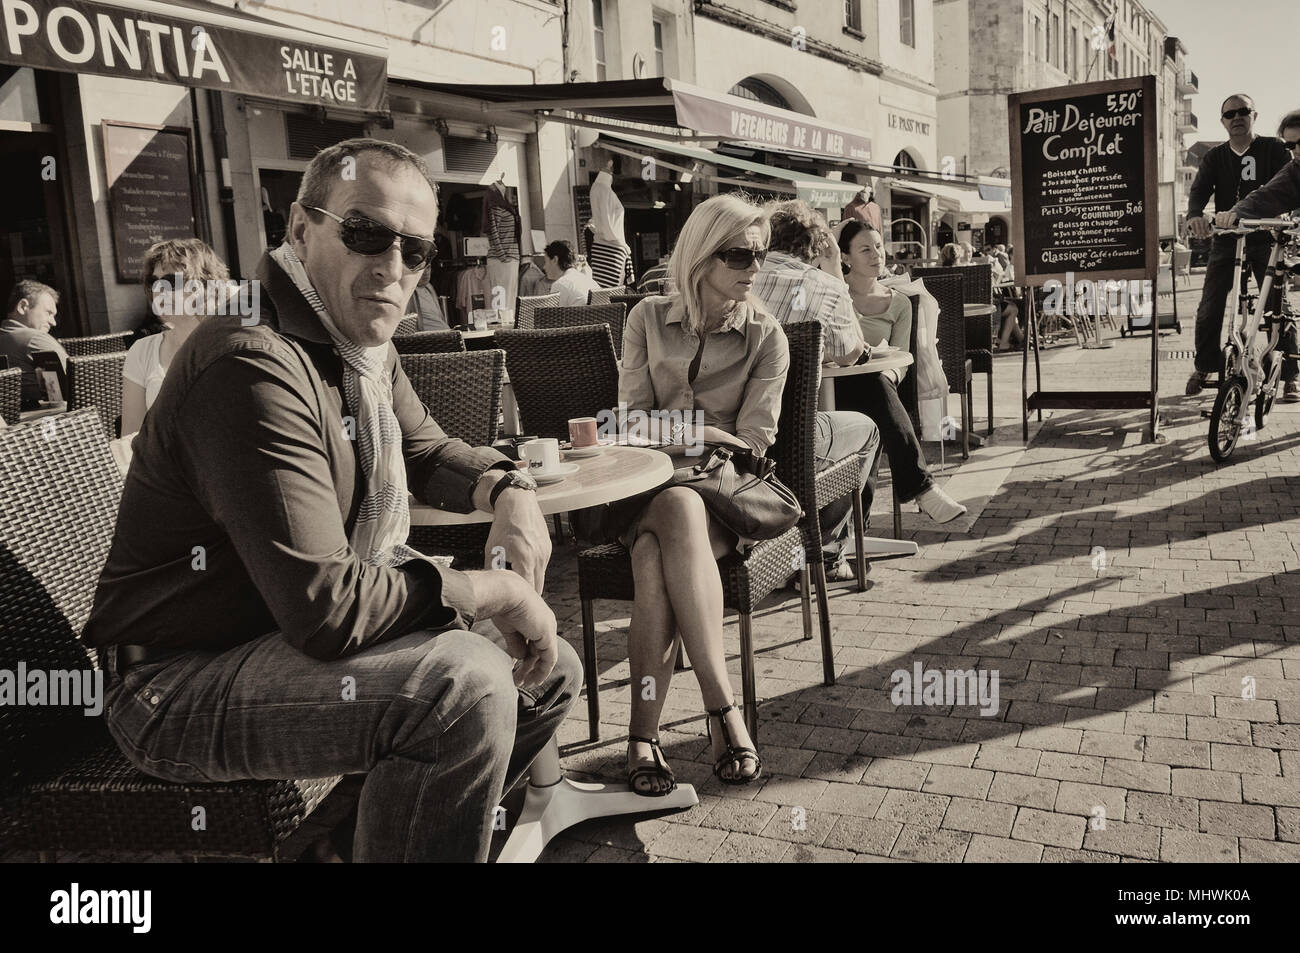 Waterfront pavement cafes and bars, La Rochelle, Charente-Maritime department., France Stock Photo